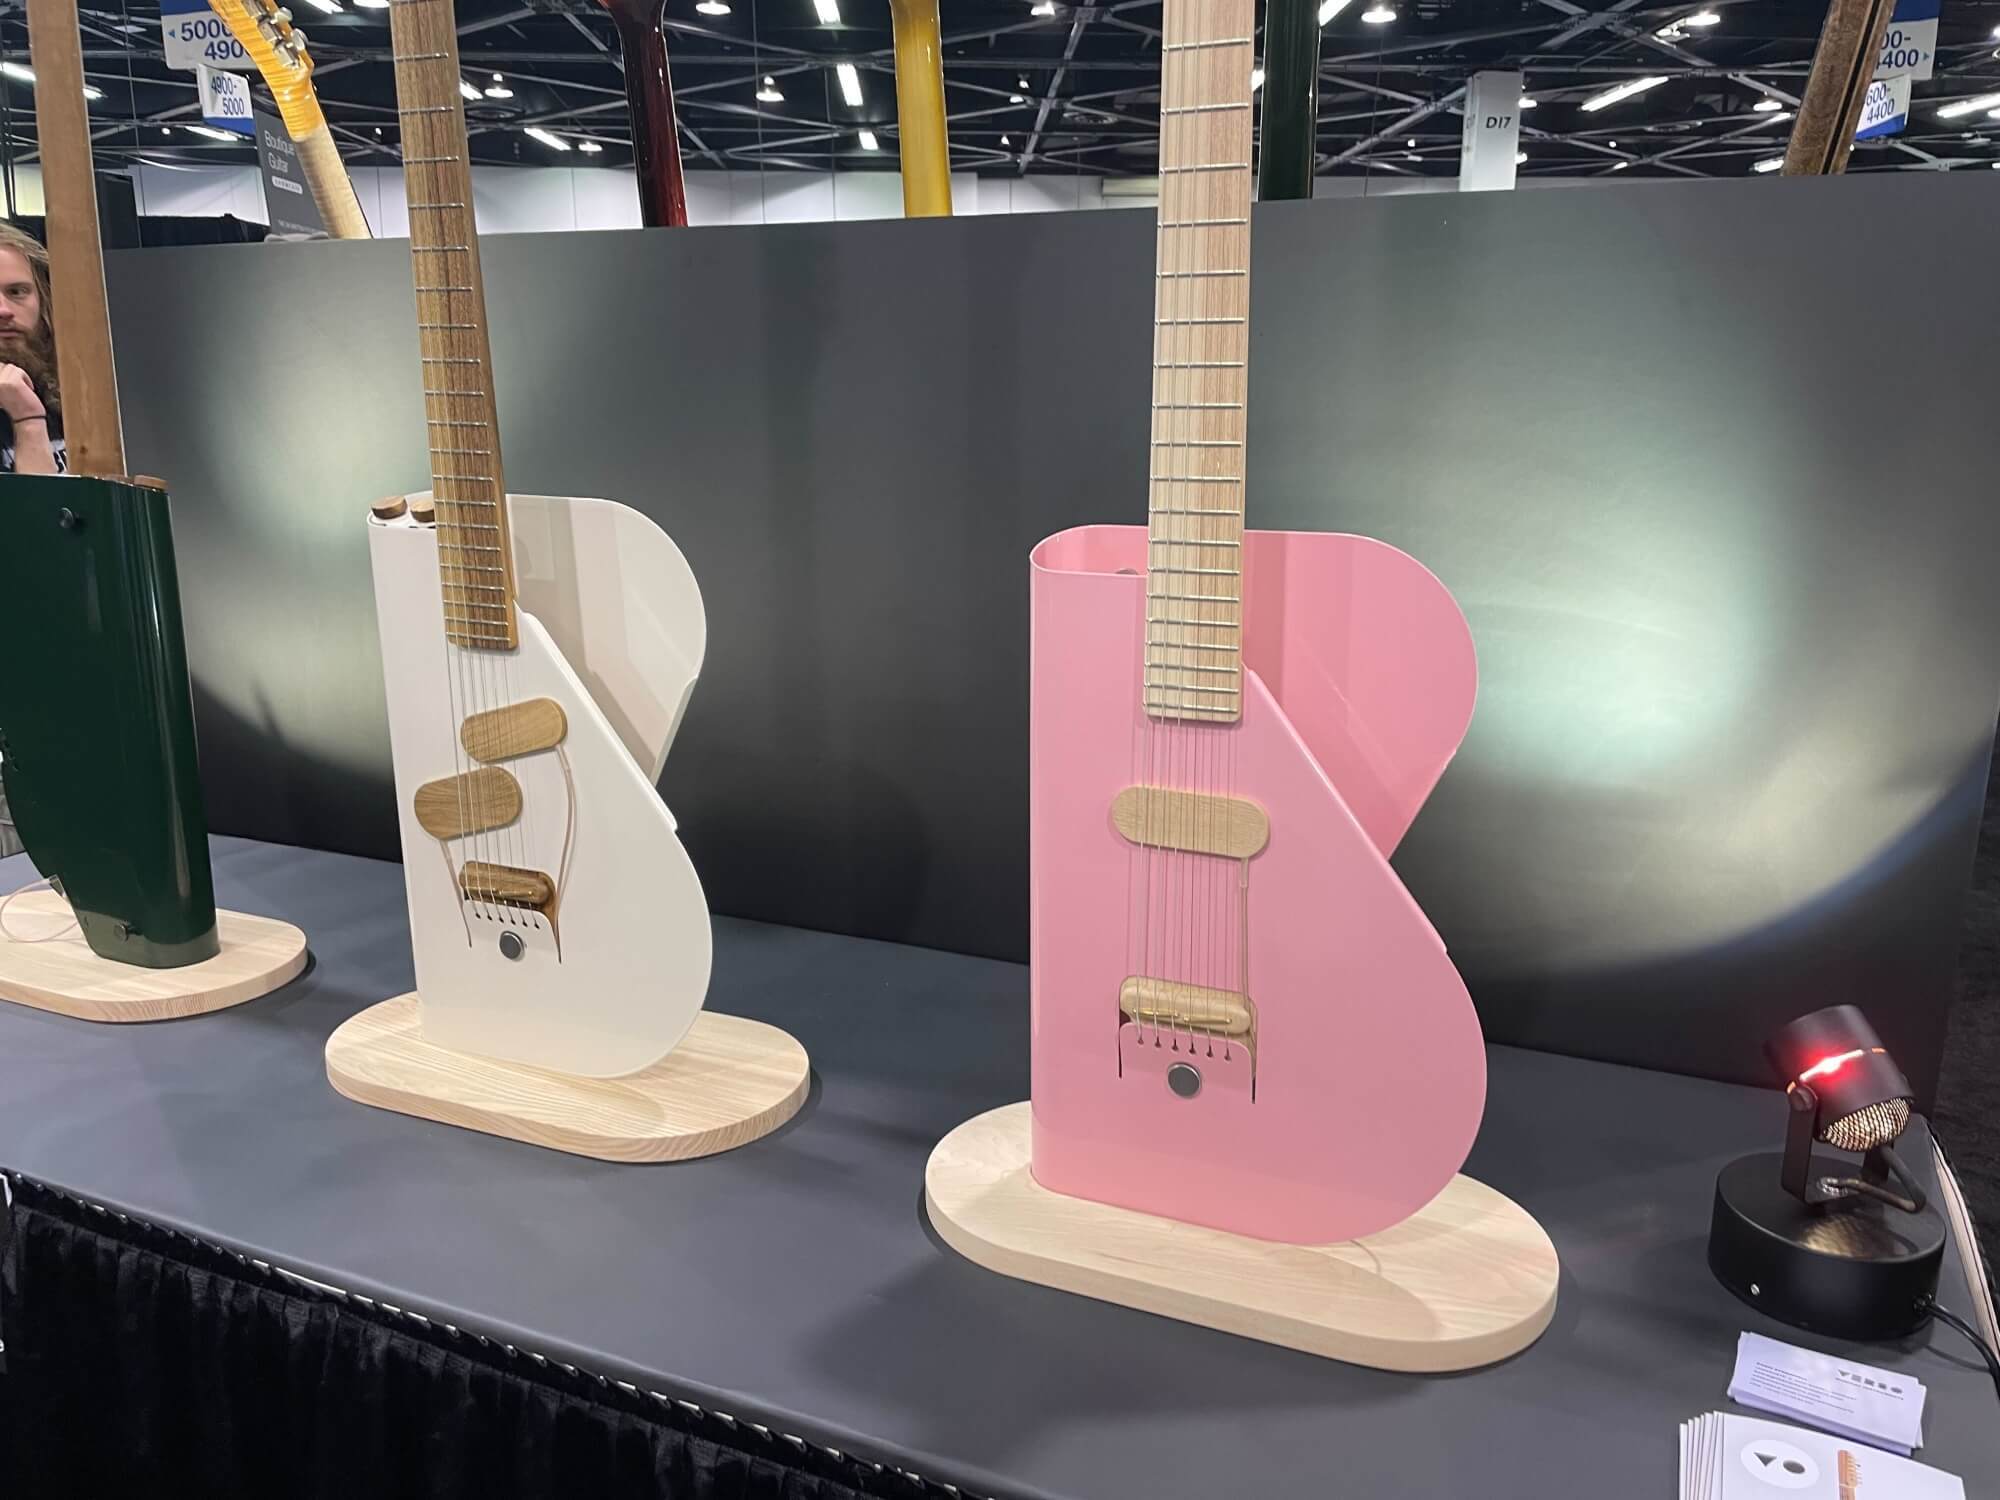 NAMM 2022 The dazzling and bewildering guitars on display from day two